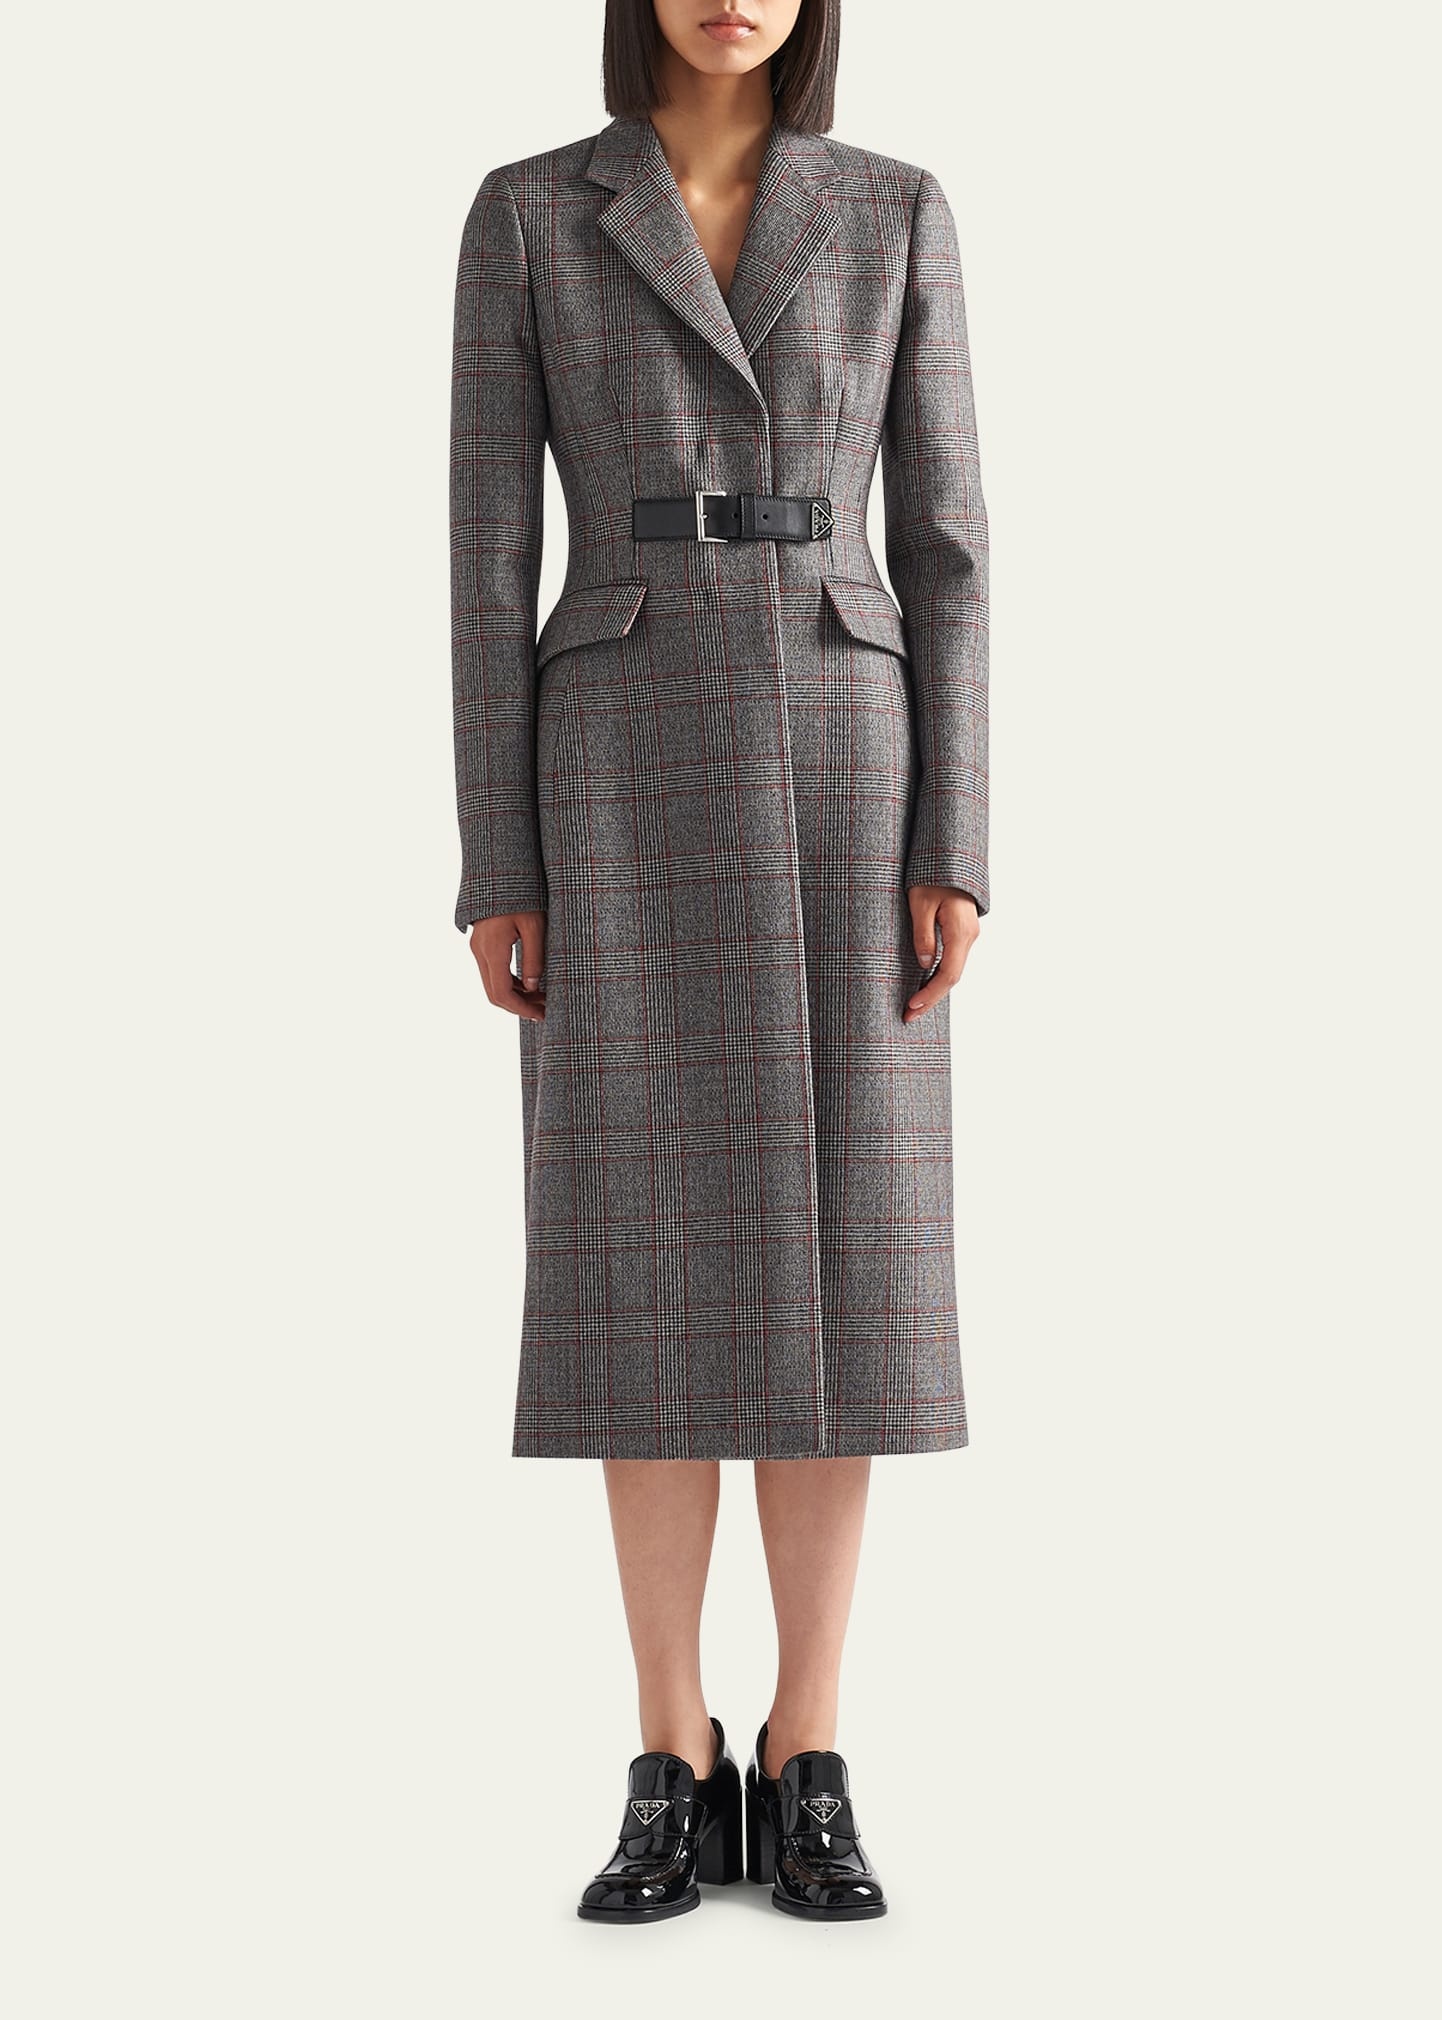 Galles Wool Coat with Leather Belt - 2